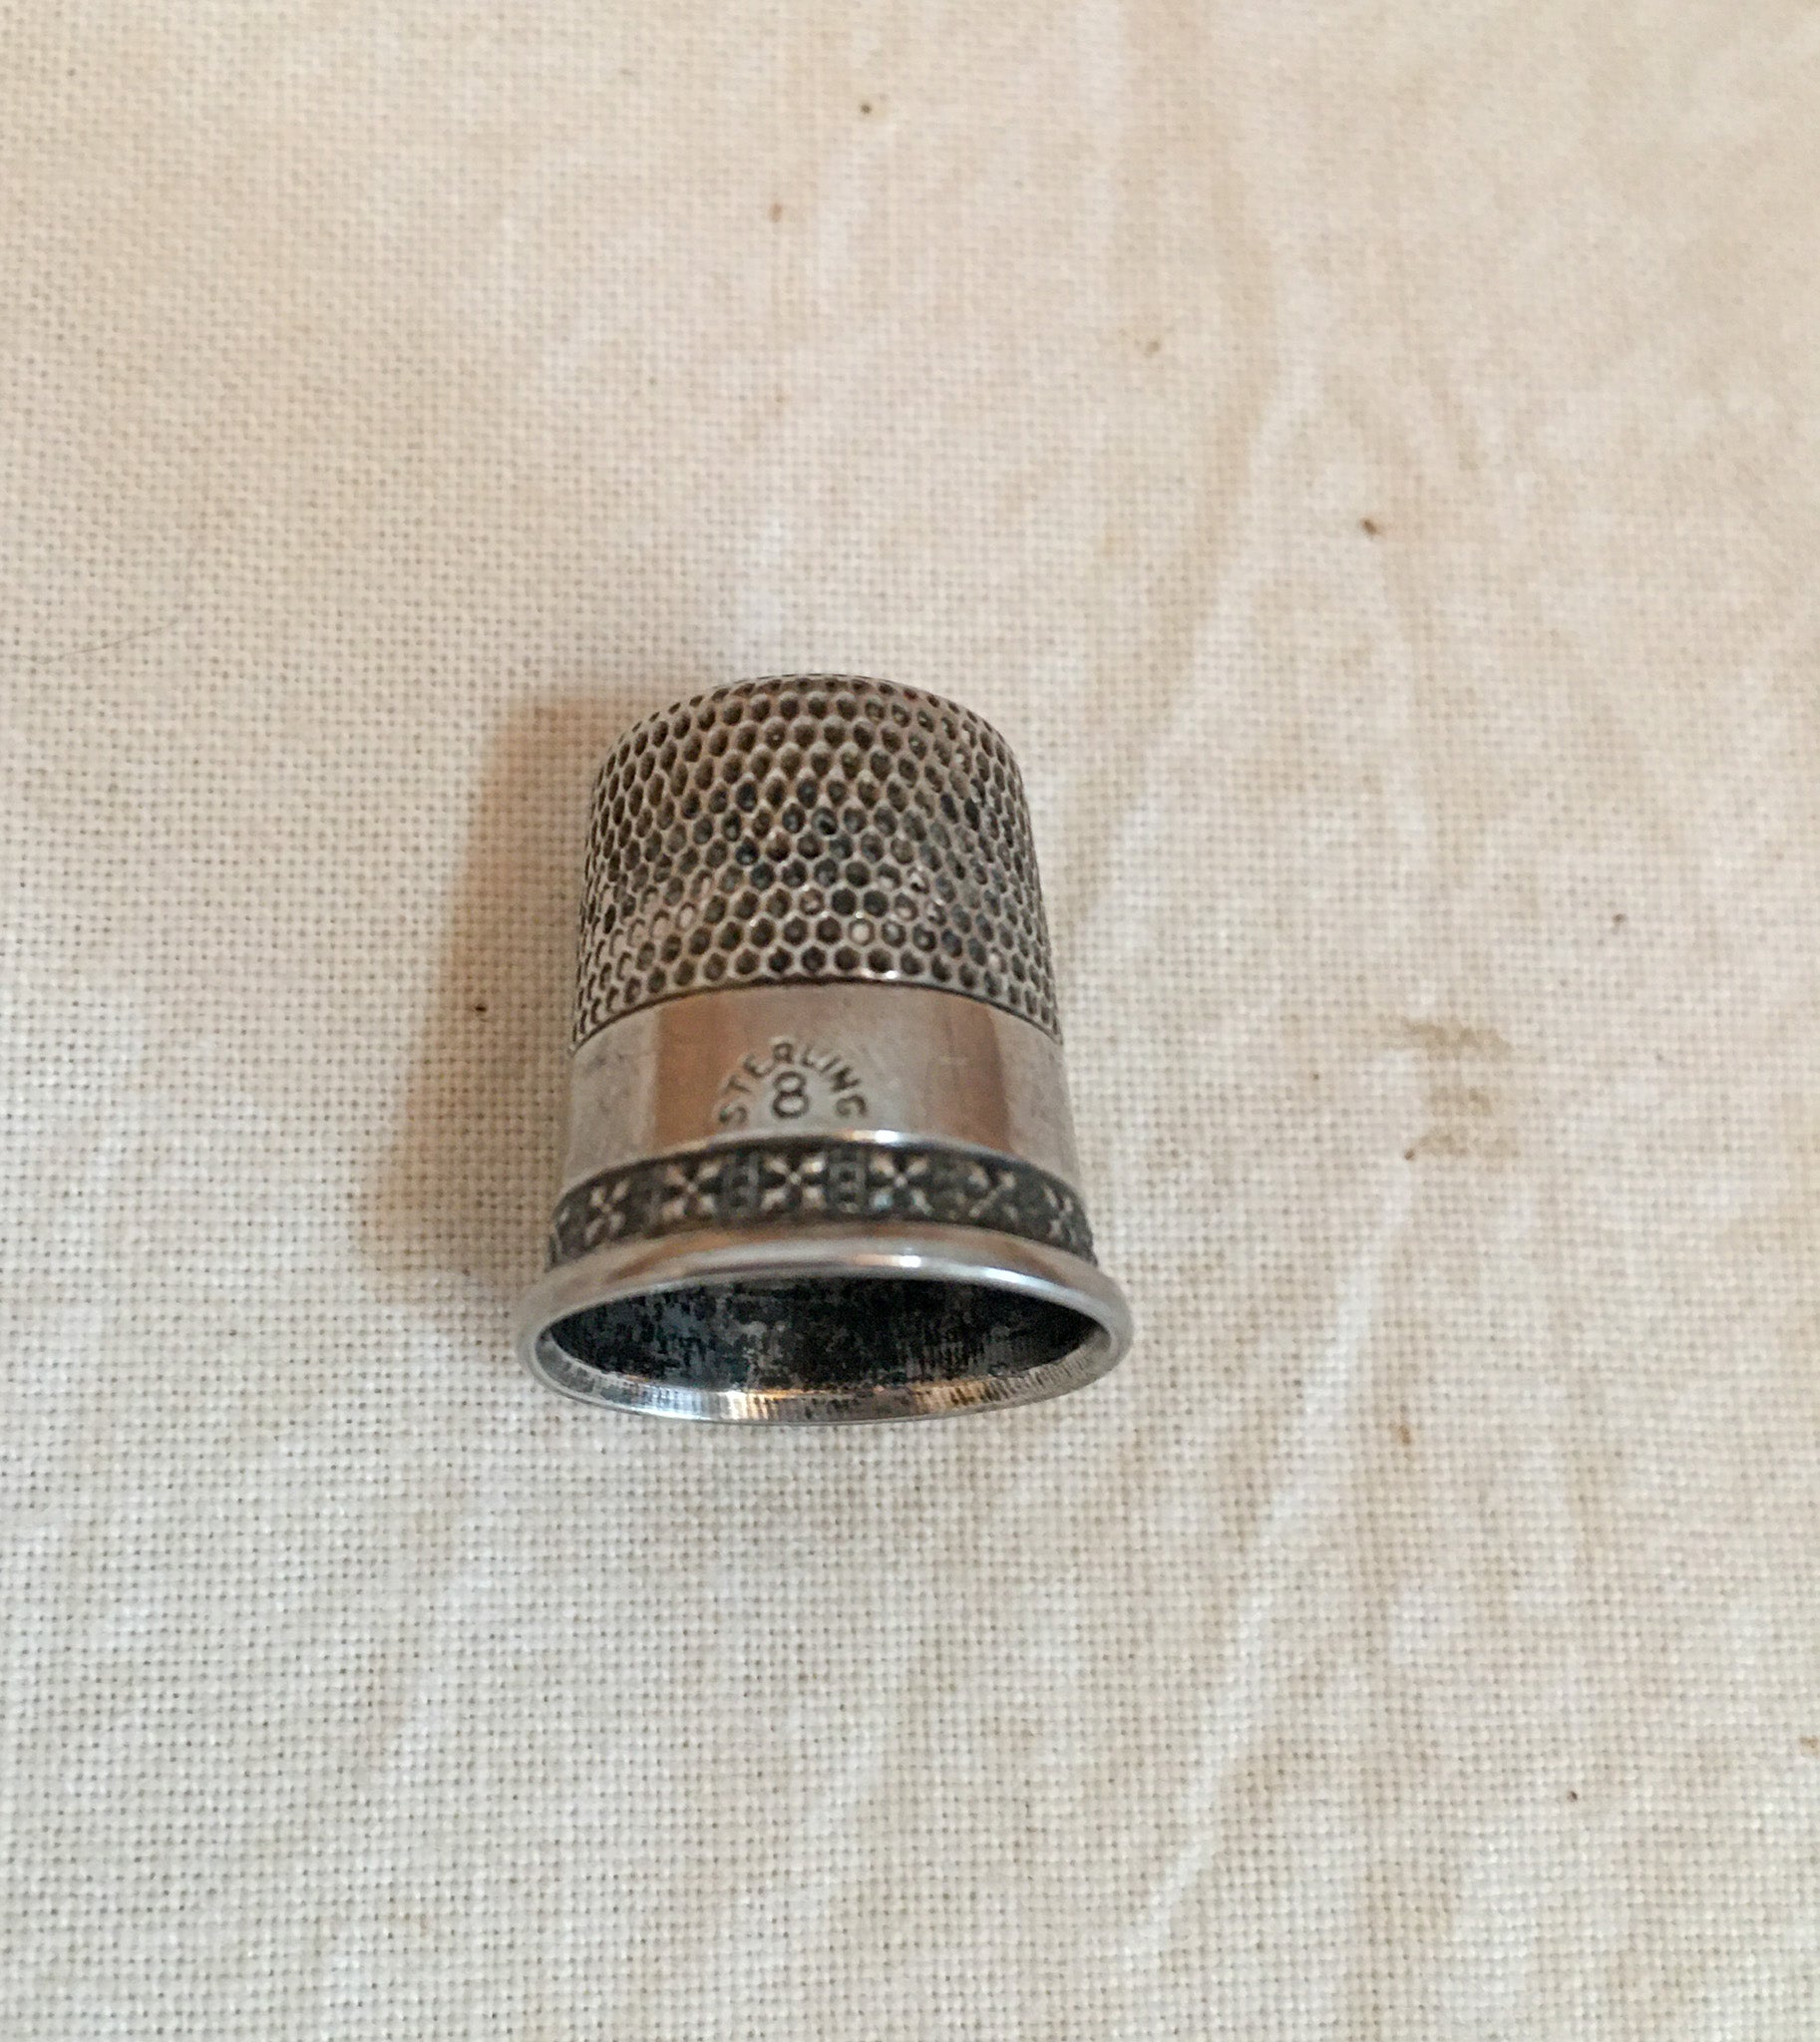 Late 1800’s – Early 1900’s Tartan Ware Thread Box with Sterling Silver Thimble